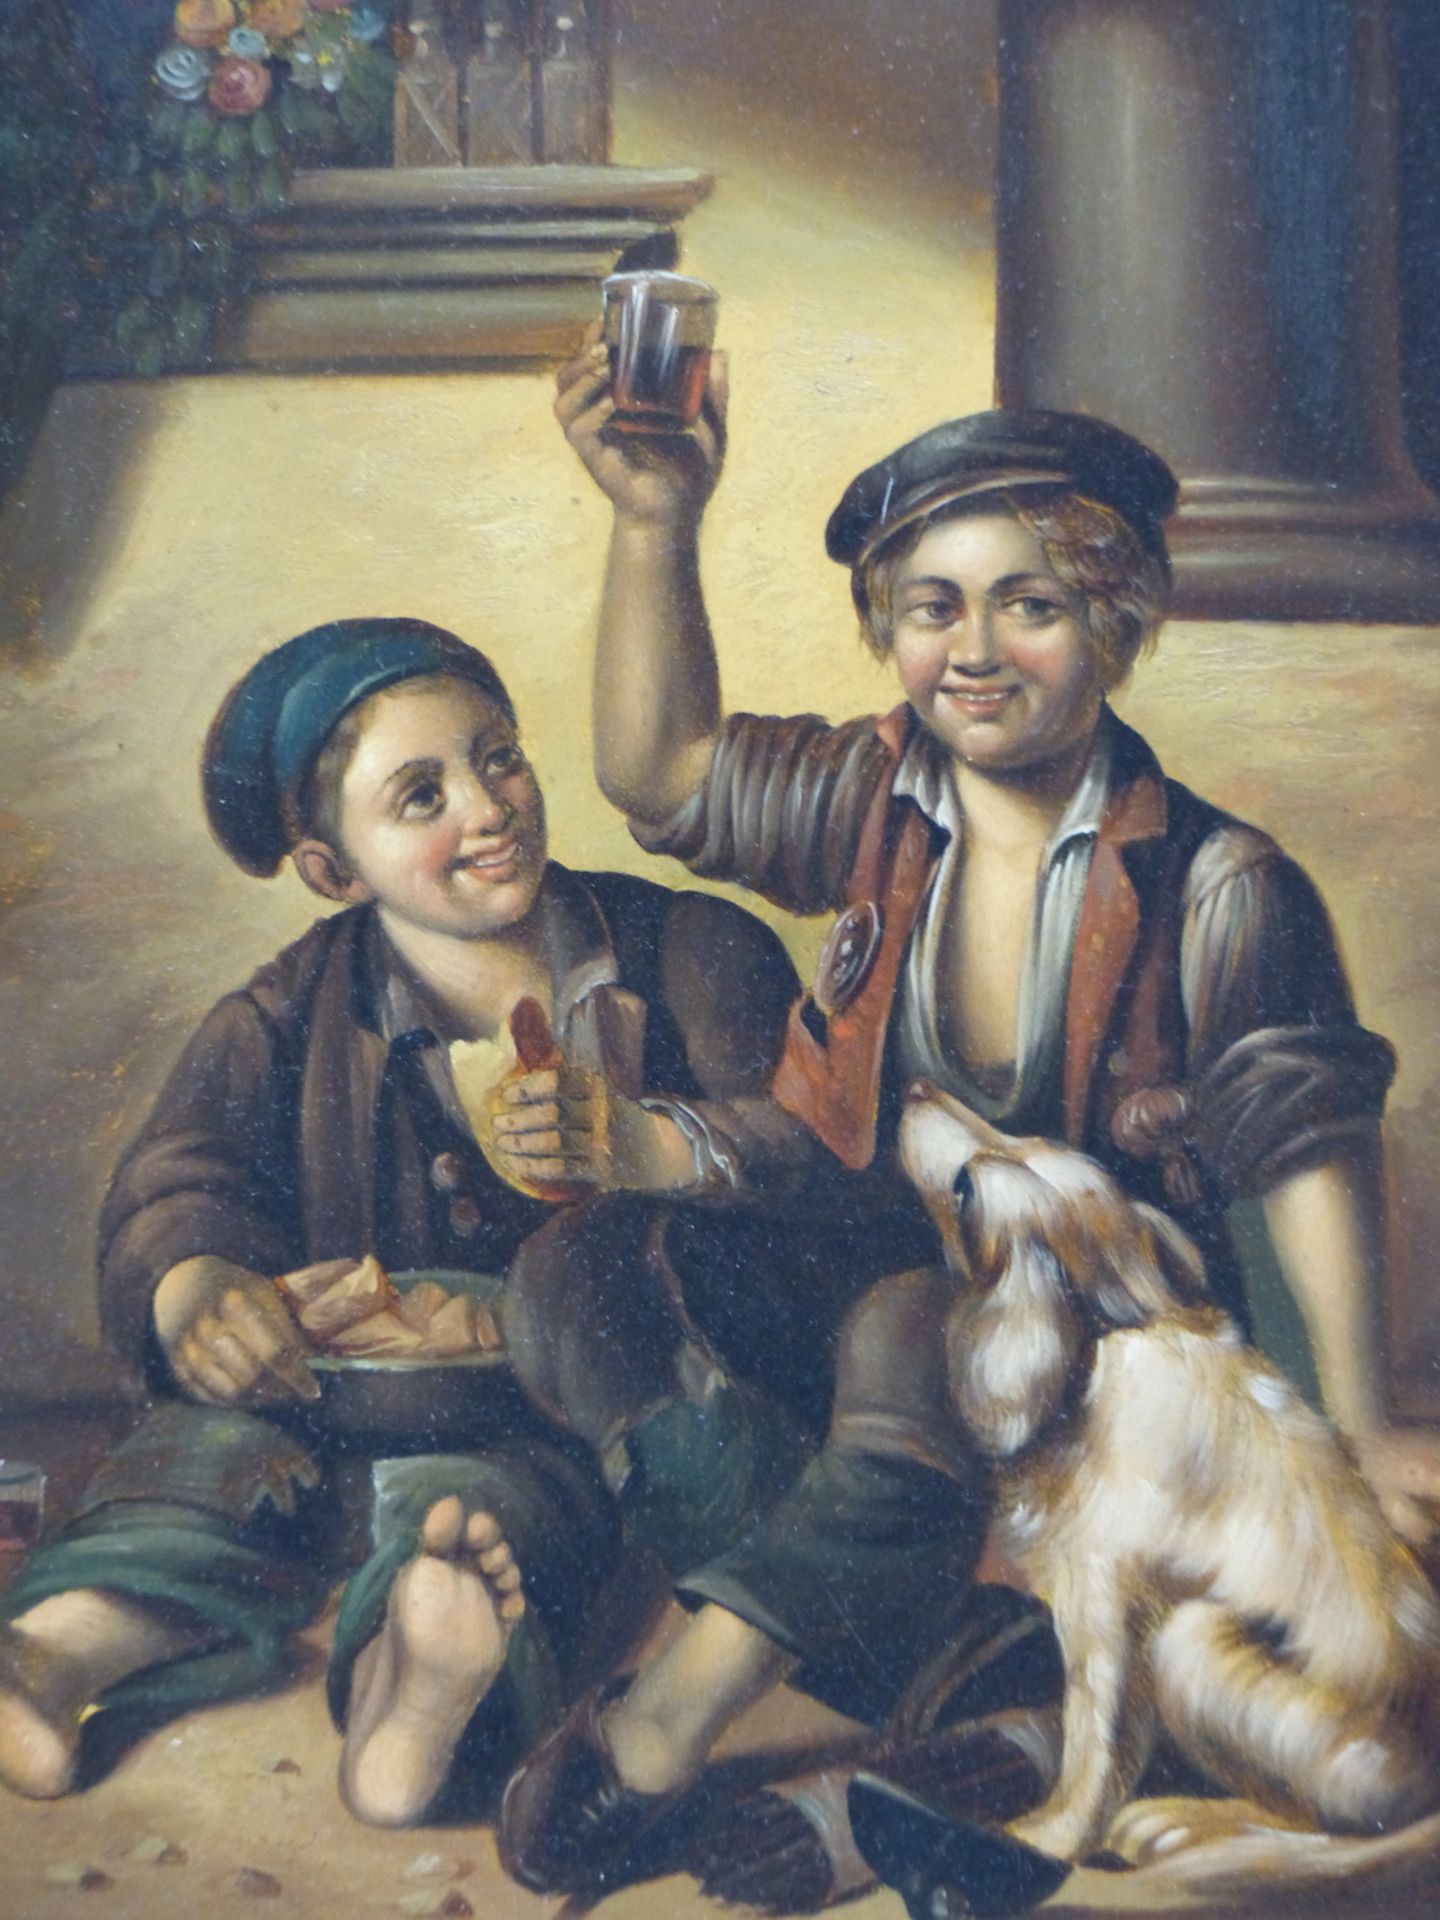 DUTCH SCHOOL, TWO BOYS WITH BREAD, BEER AND THEIR DOG, OIL ON BOARD. 15 X 19 cm